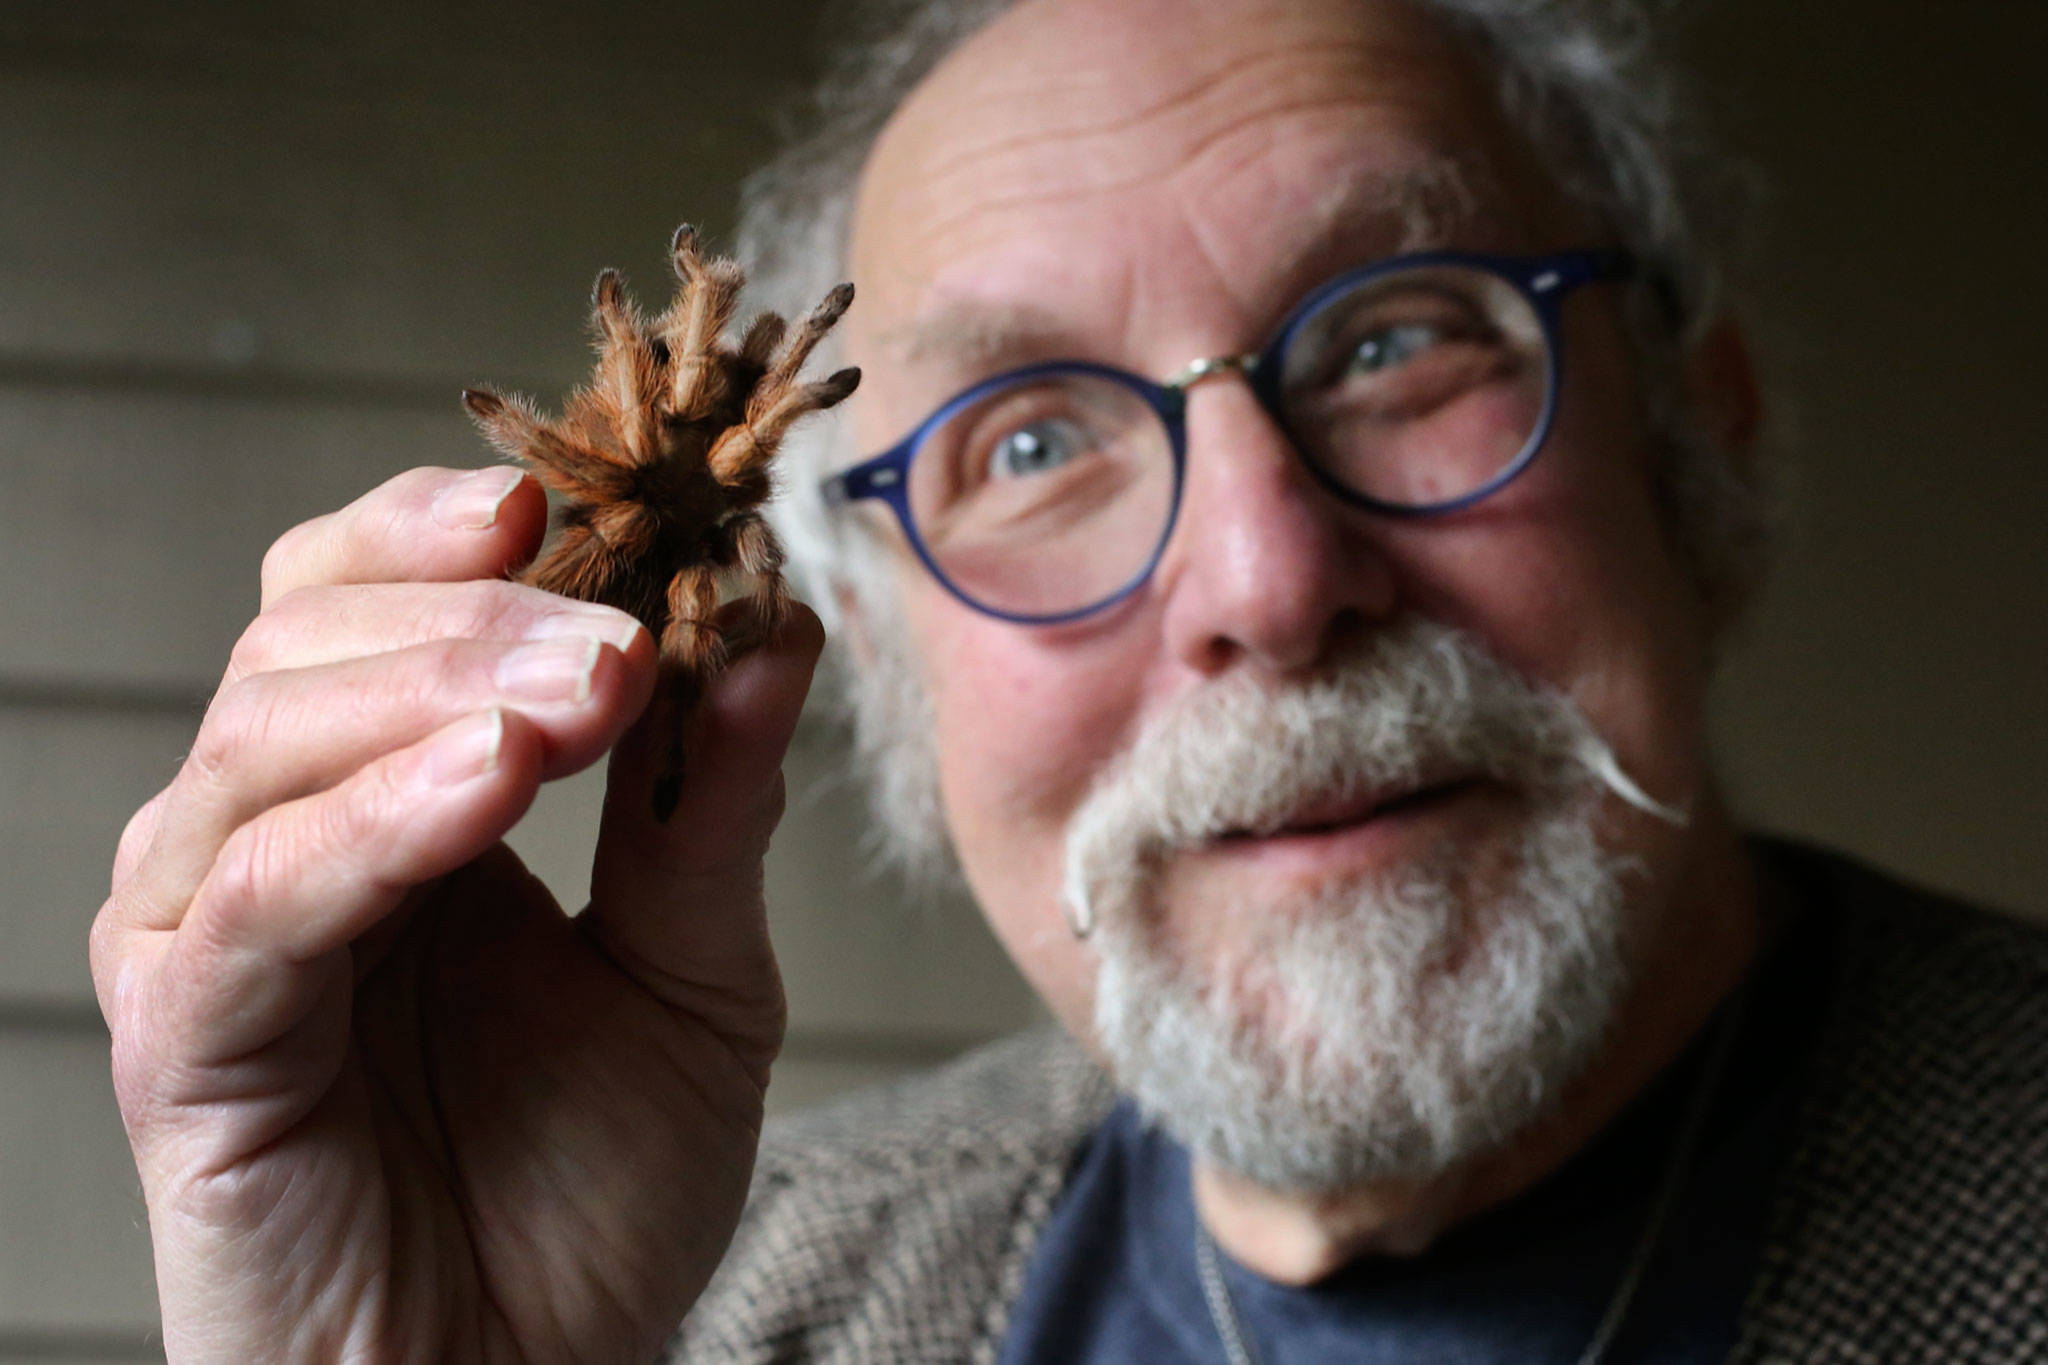 David George Gordon is hosting a bug dinner on Feb. 16 at Darrell’s Tavern in Shoreline that’s $45 a plate. One of the dishes will consist of a western brown tarantula. (Kevin Clark / The Herald)